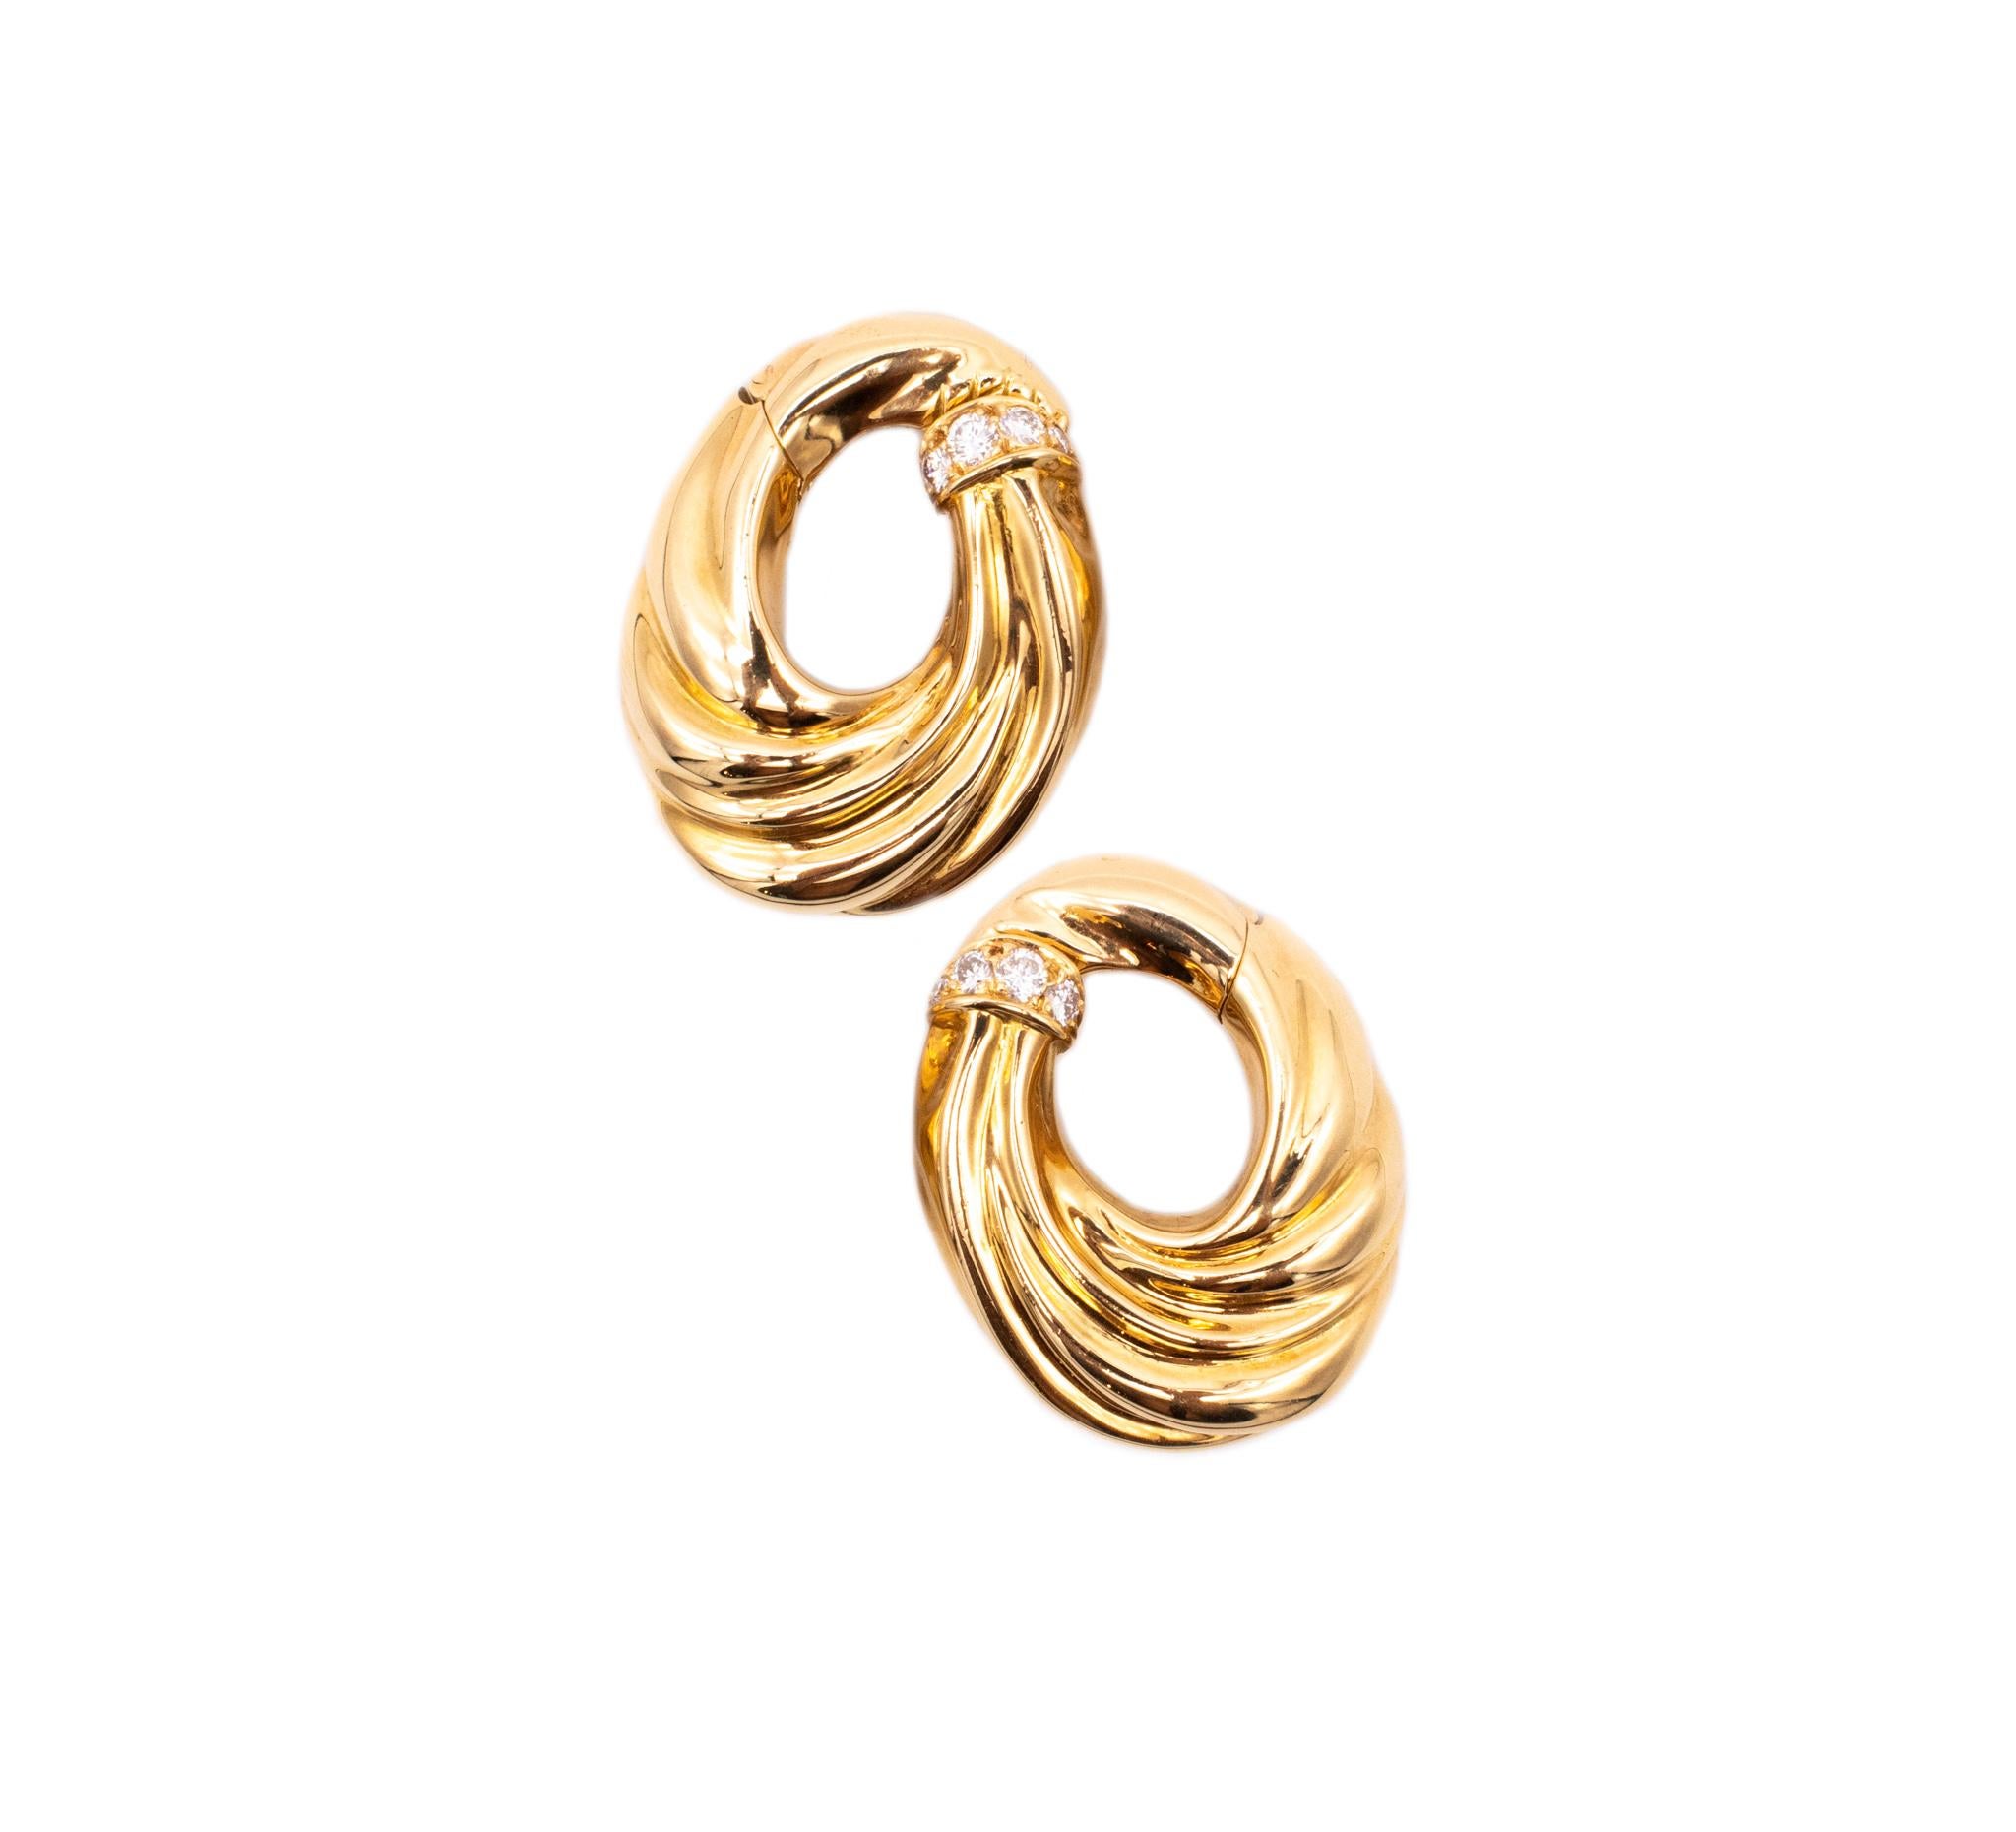 Van Cleef And Arpels 1970 Paris 18Kt Gold Clips Earrings With VVS Diamonds In Excellent Condition For Sale In Miami, FL